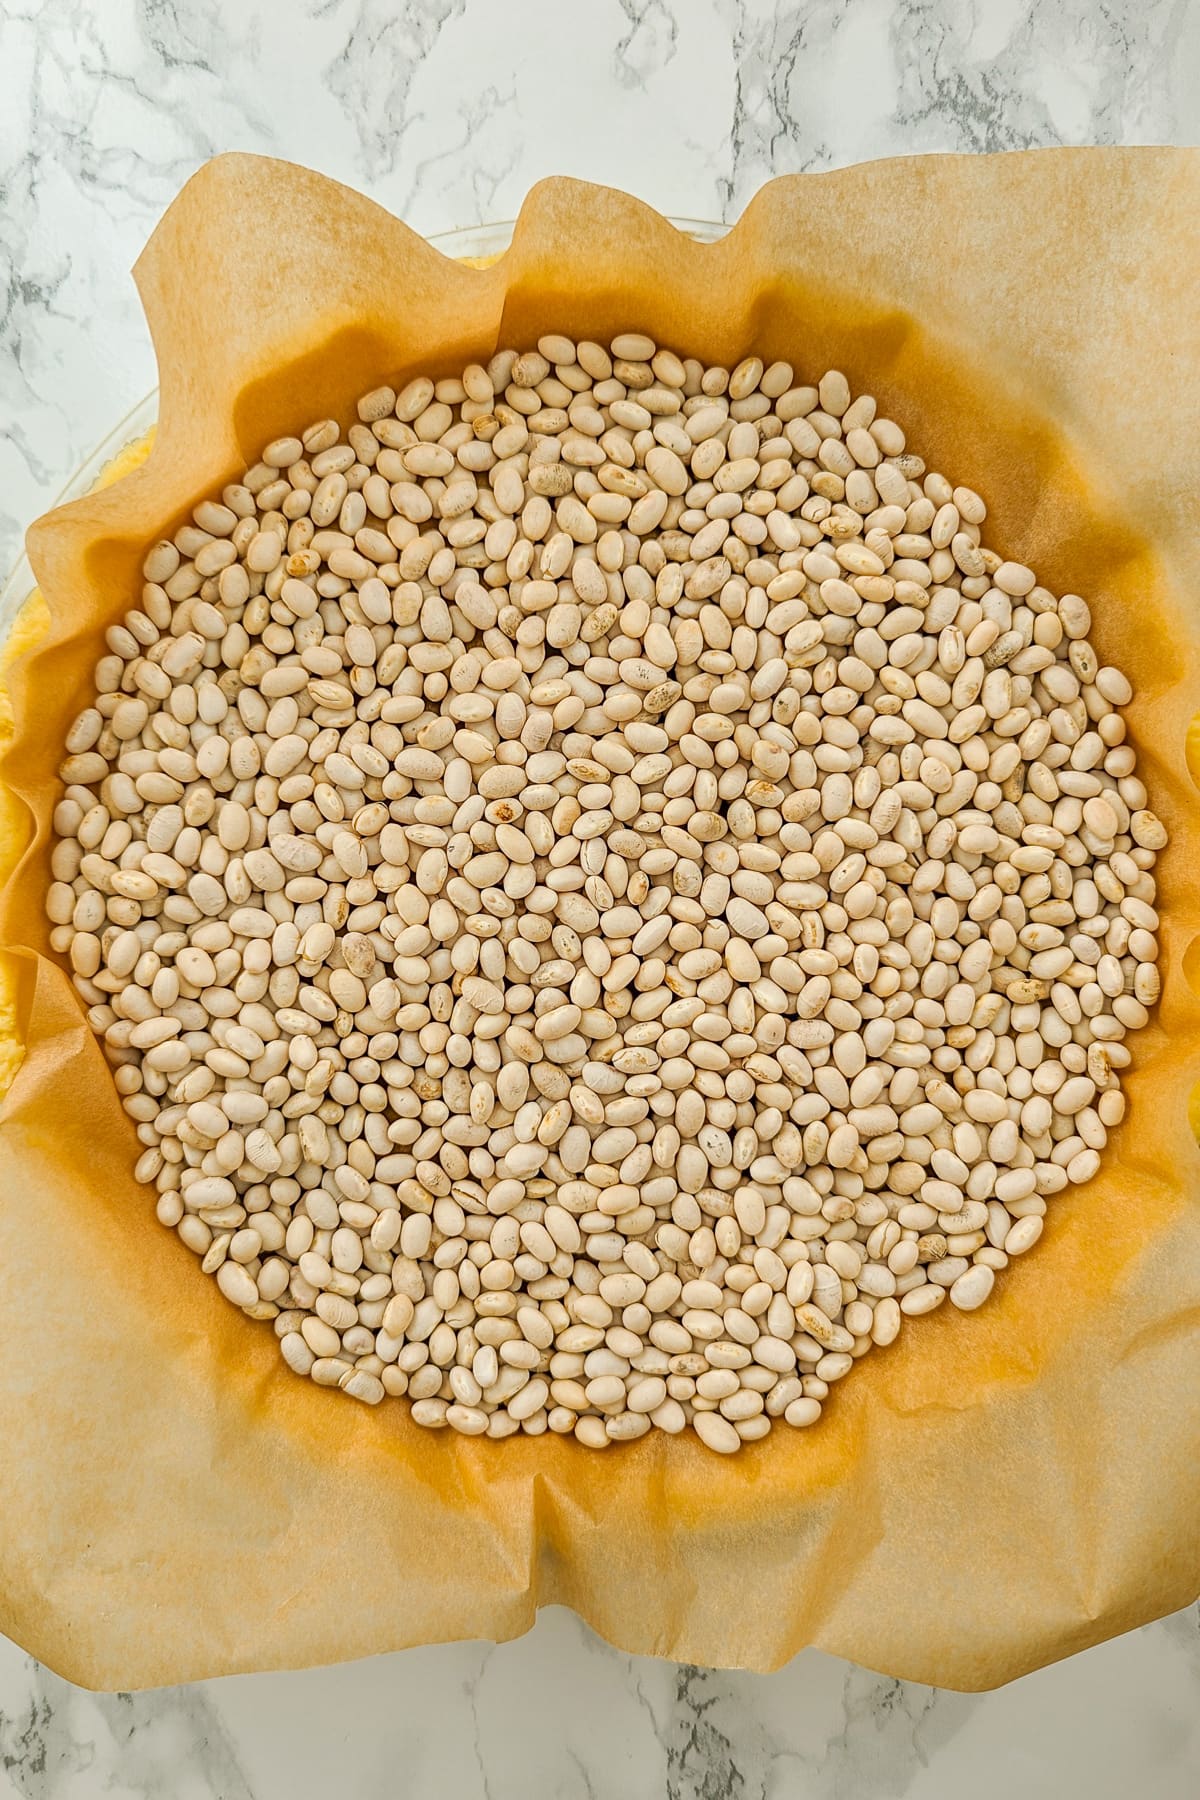 Top view of beans covered the tart of the pie.